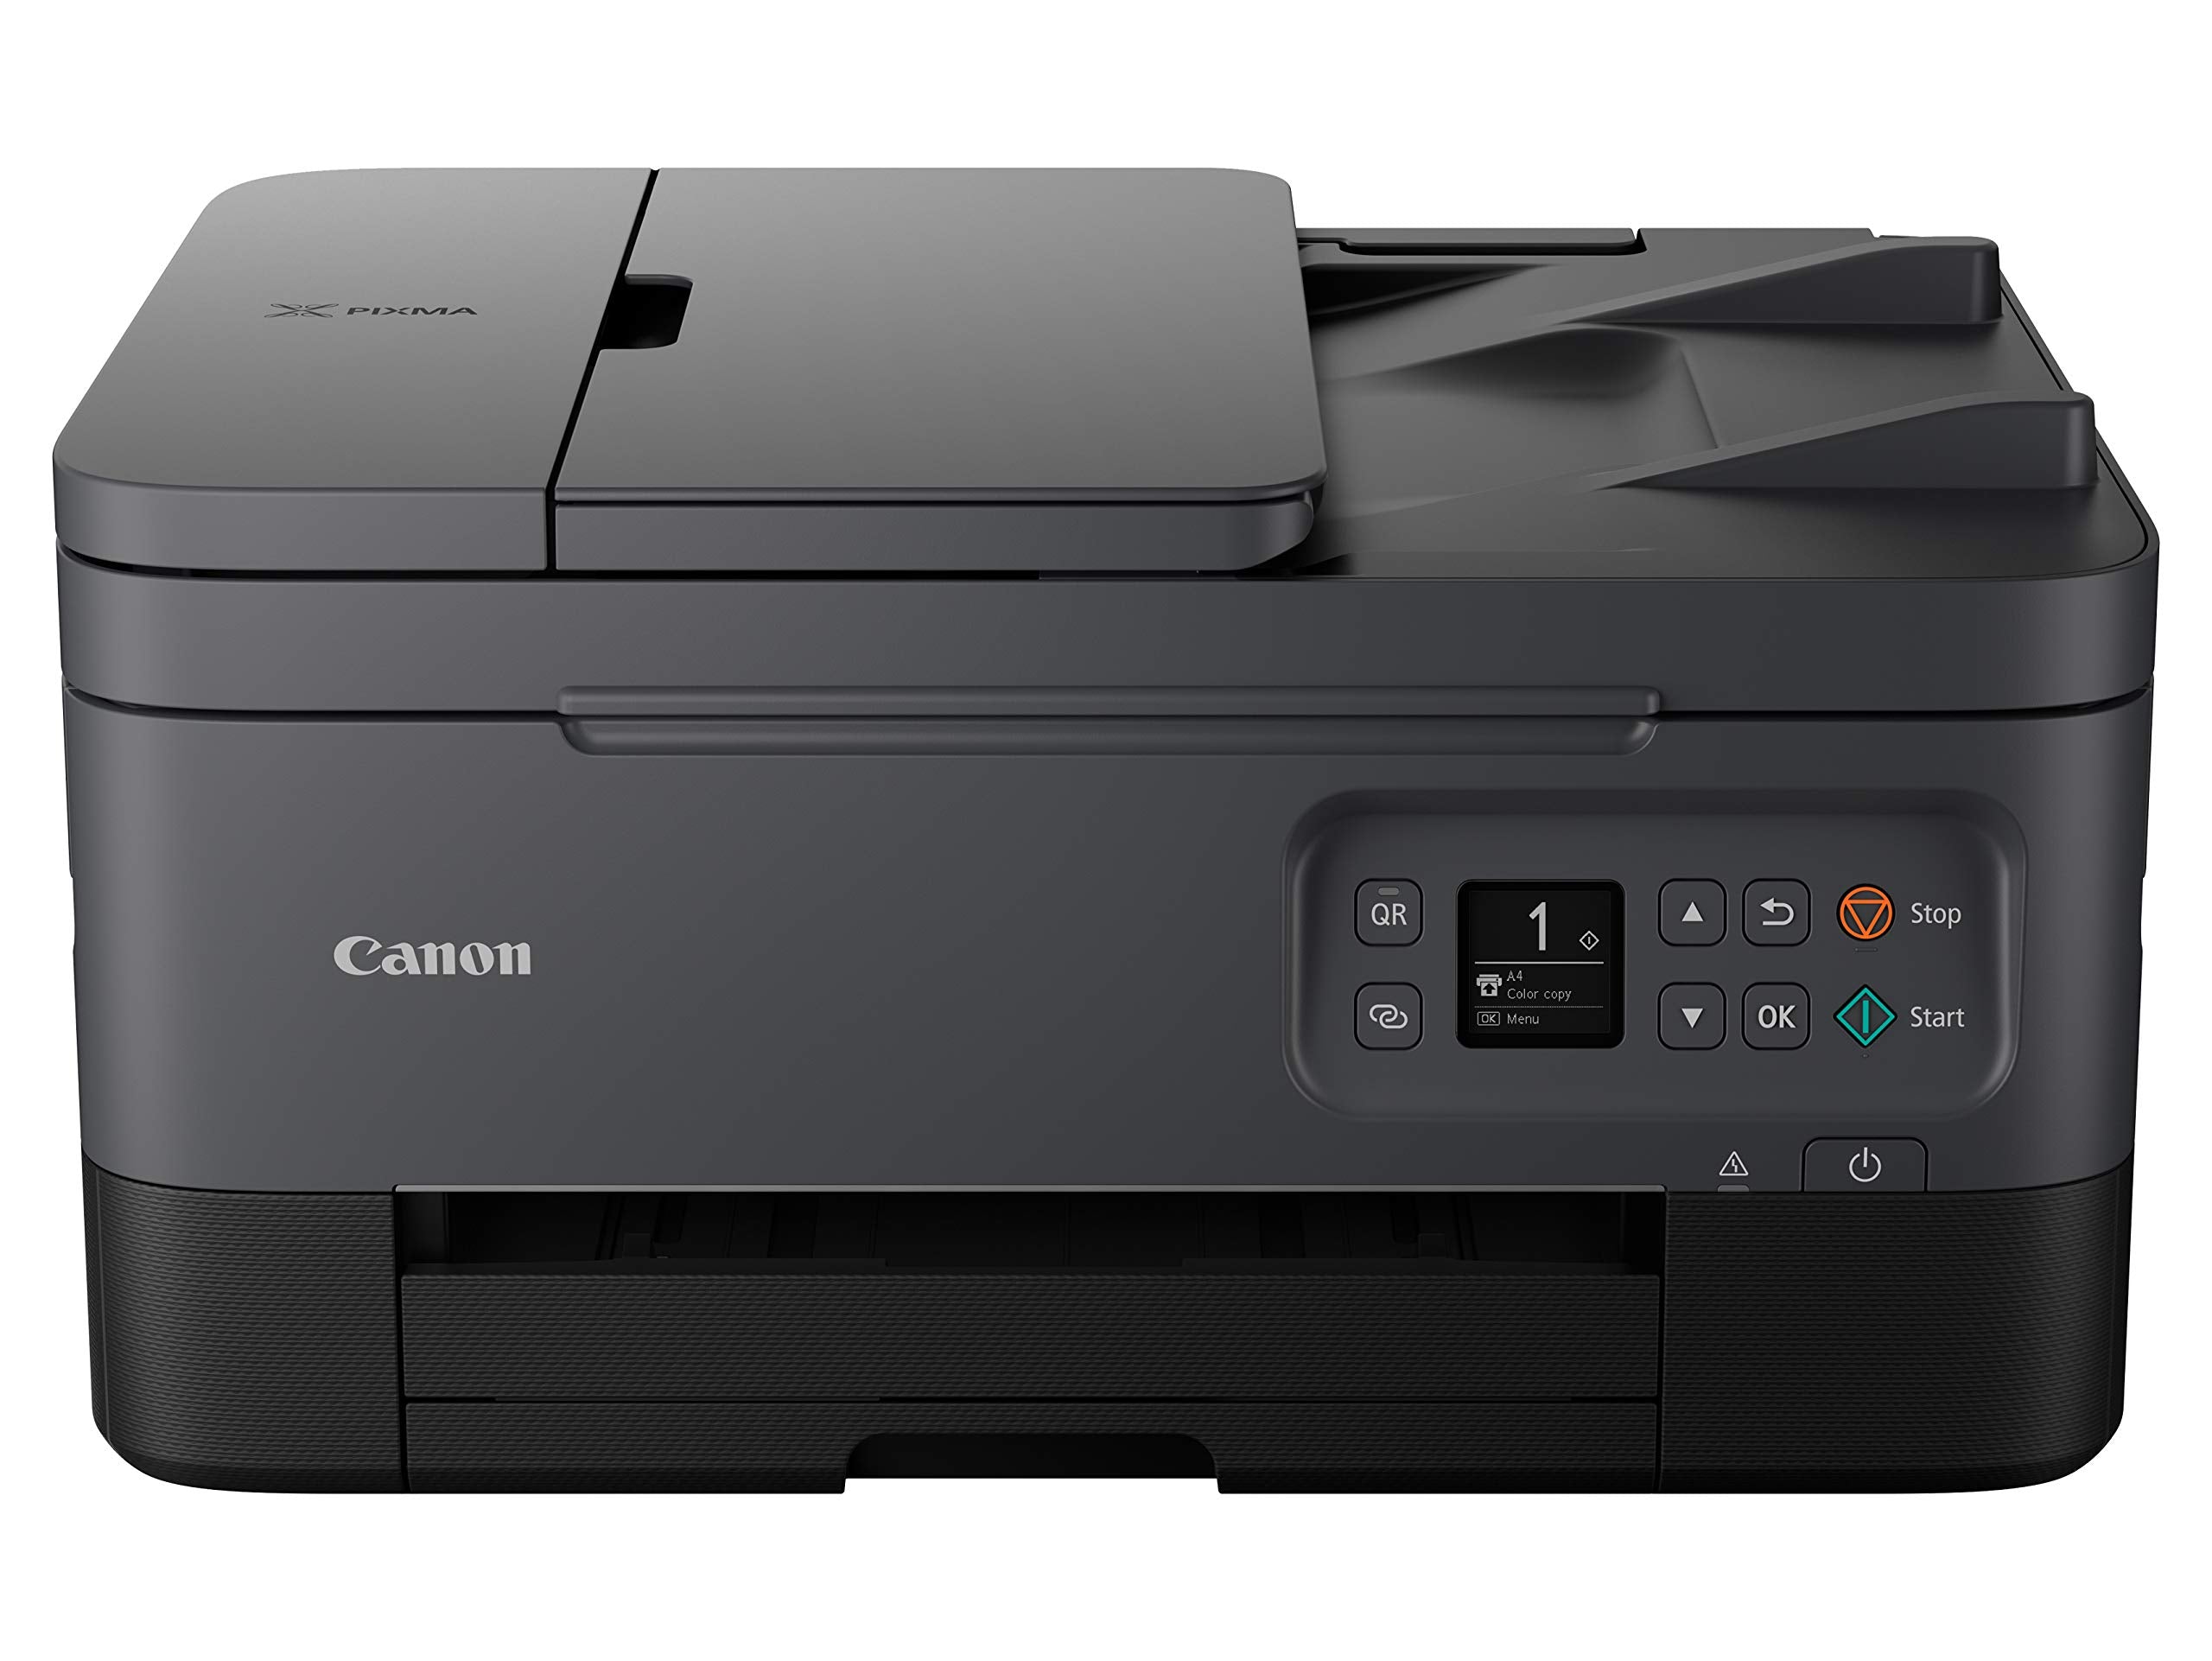 Canon TR7020 All-in-One Wireless Printer for Home Use,Black, Compact (4460C002)  - Like New